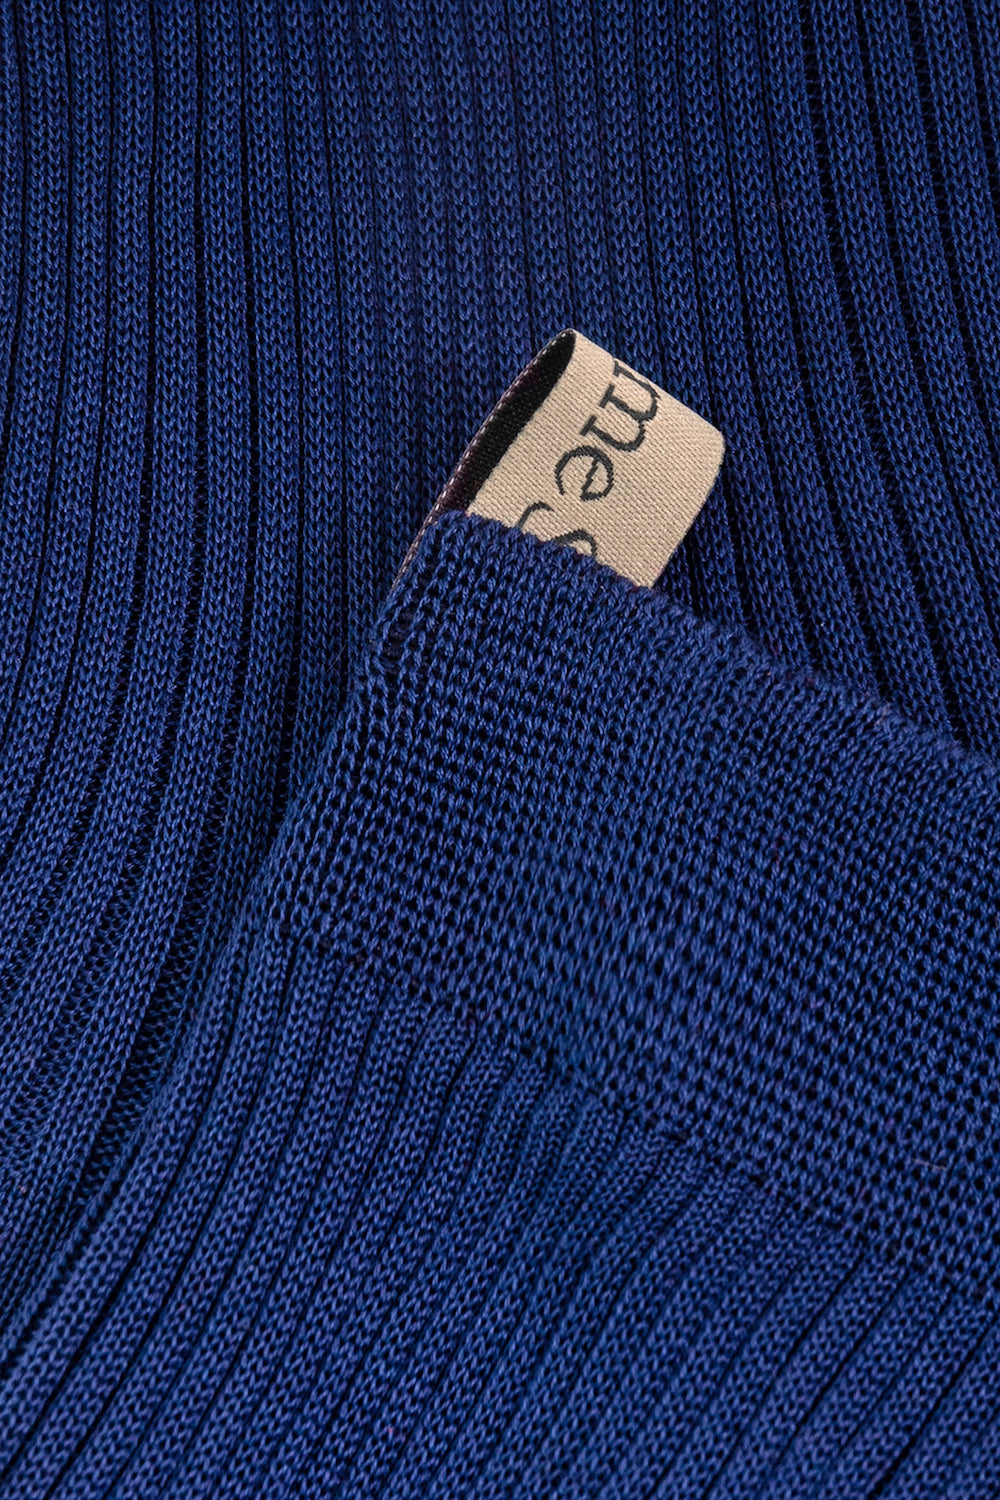 Ribbon tag cuff detail, The Agnelli Sock in Varsity Blue, Egyptian cotton sock by comme si